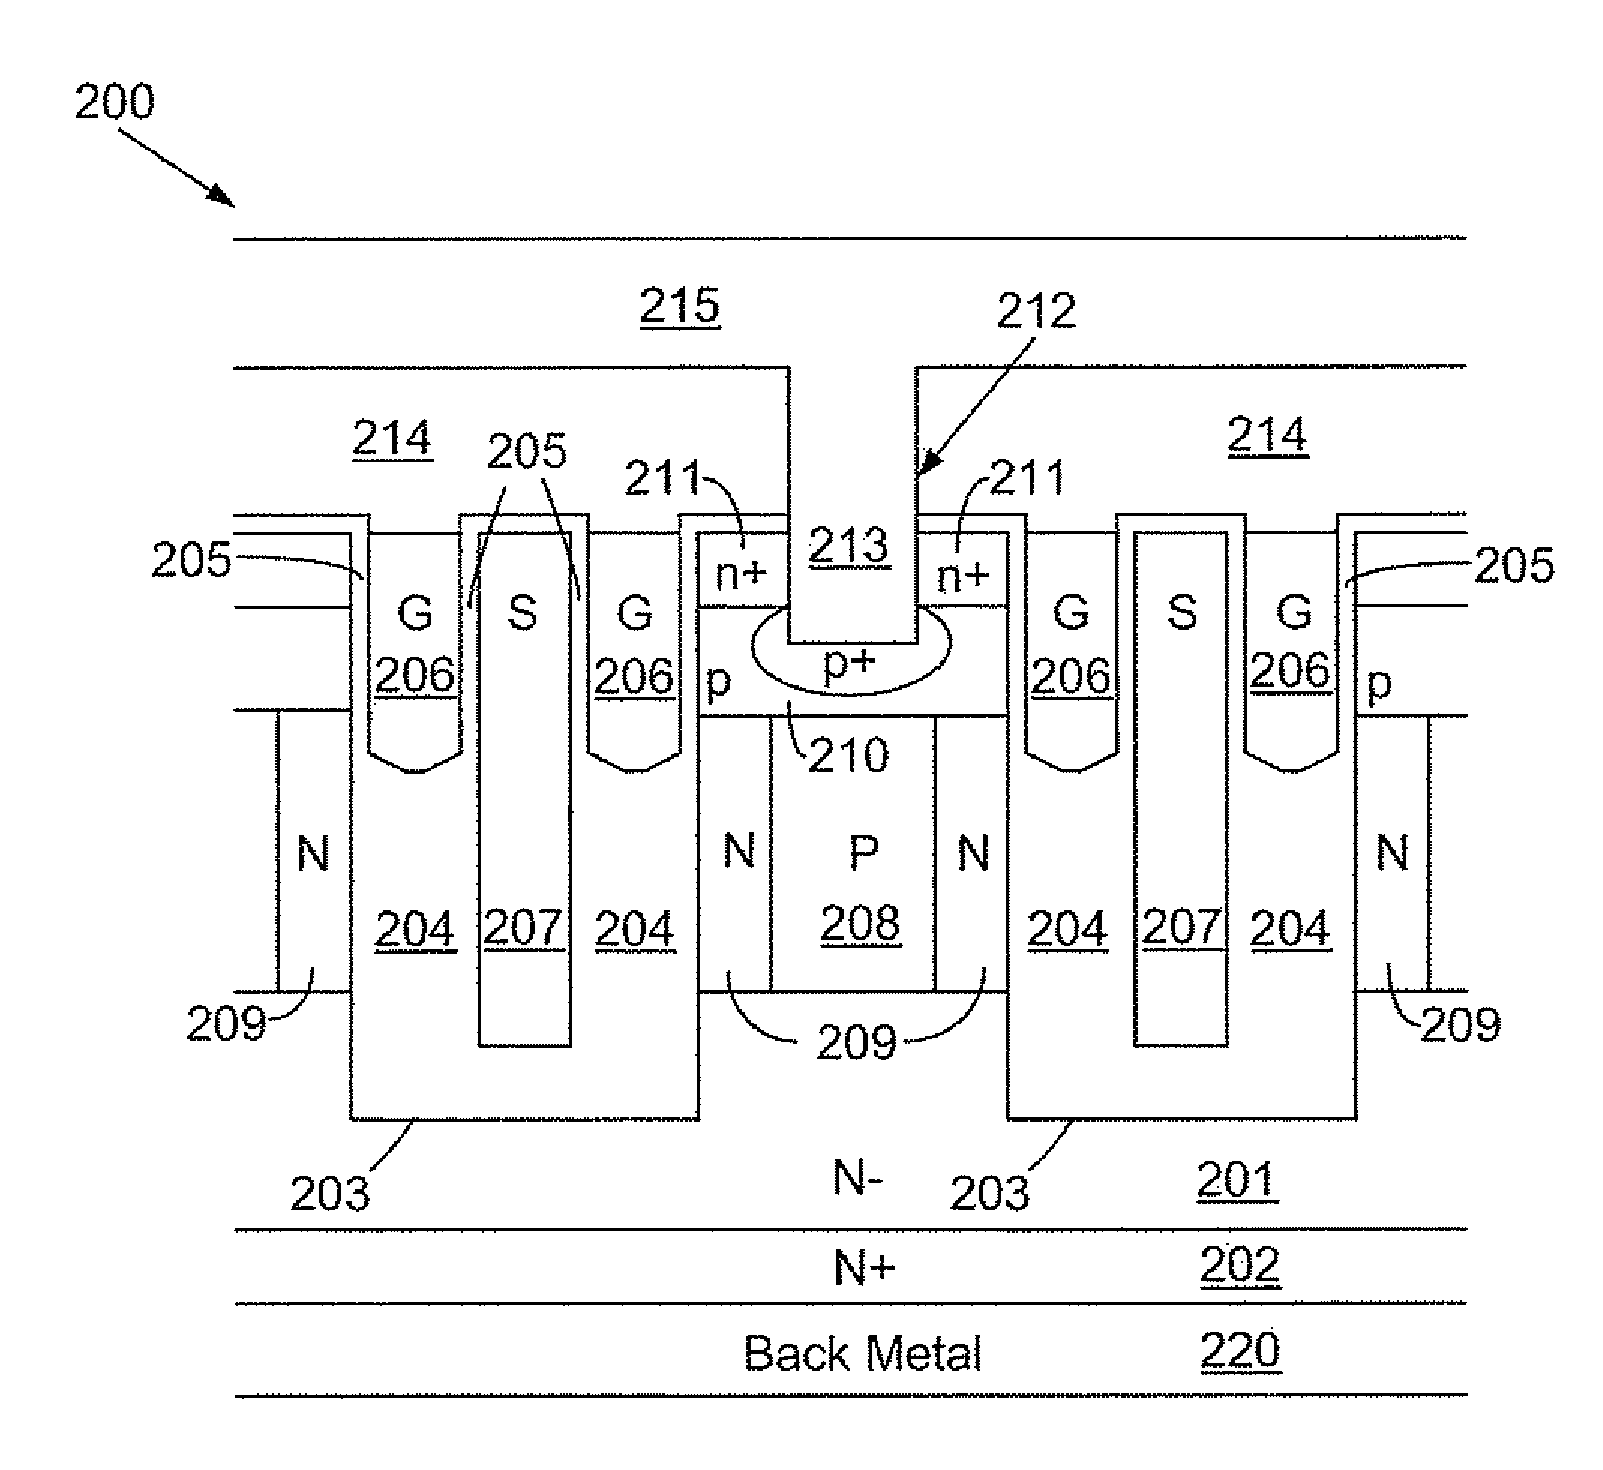 Super-junction trench MOSFET with Resurf stepped oxides and split gate electrodes